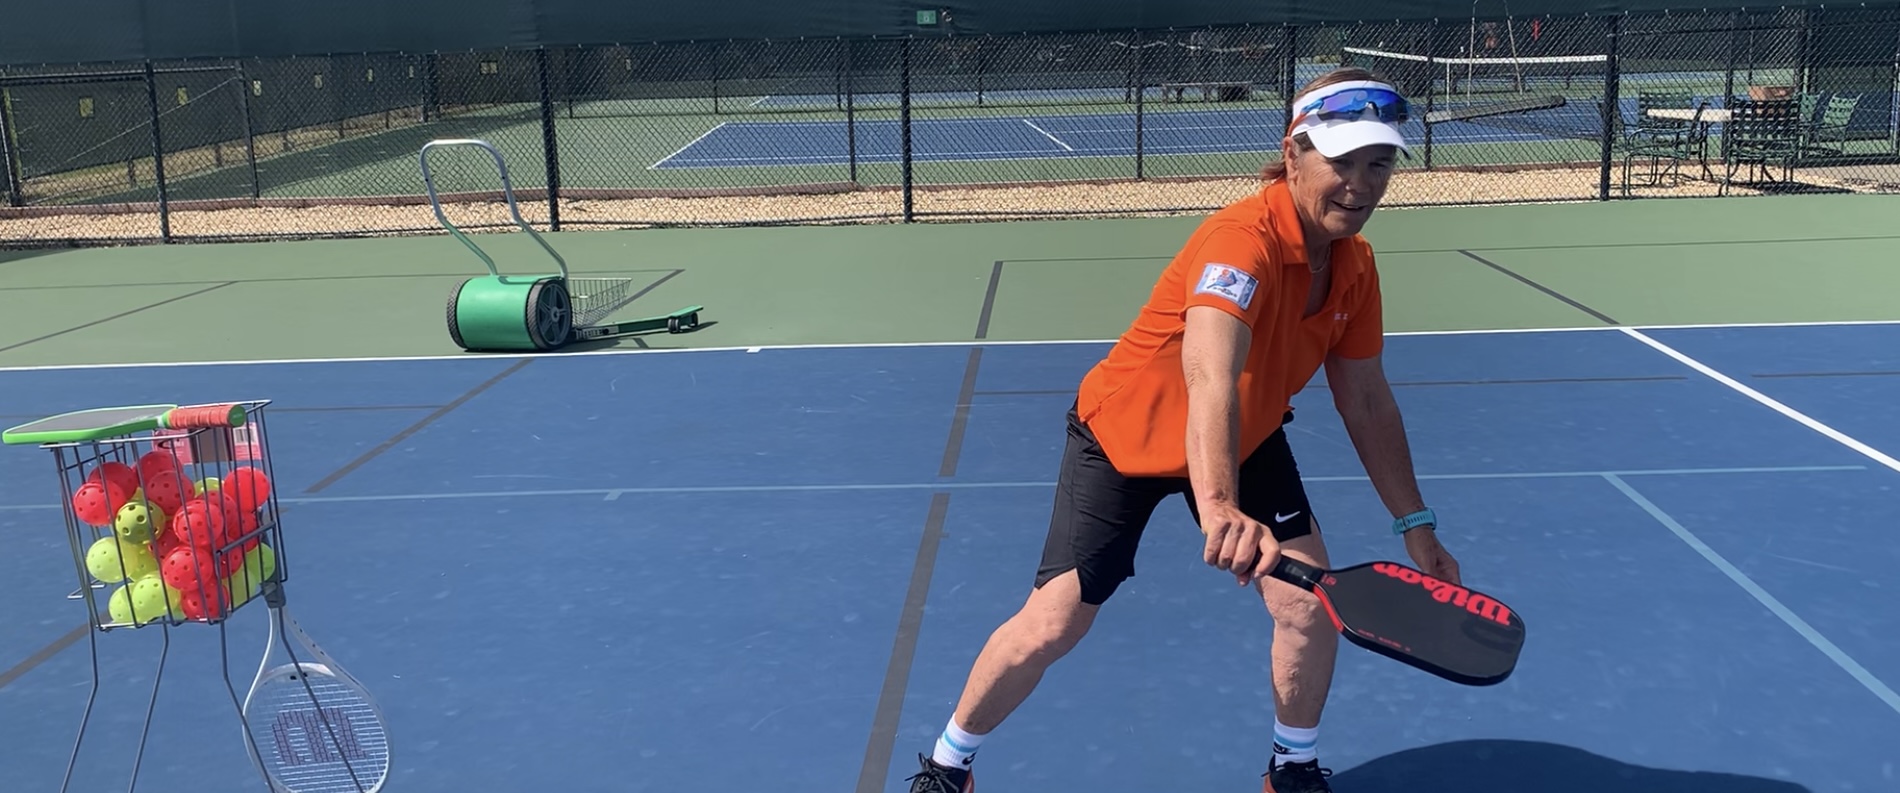 Why We Need to Take the Ball Out of the Air in Pickleball